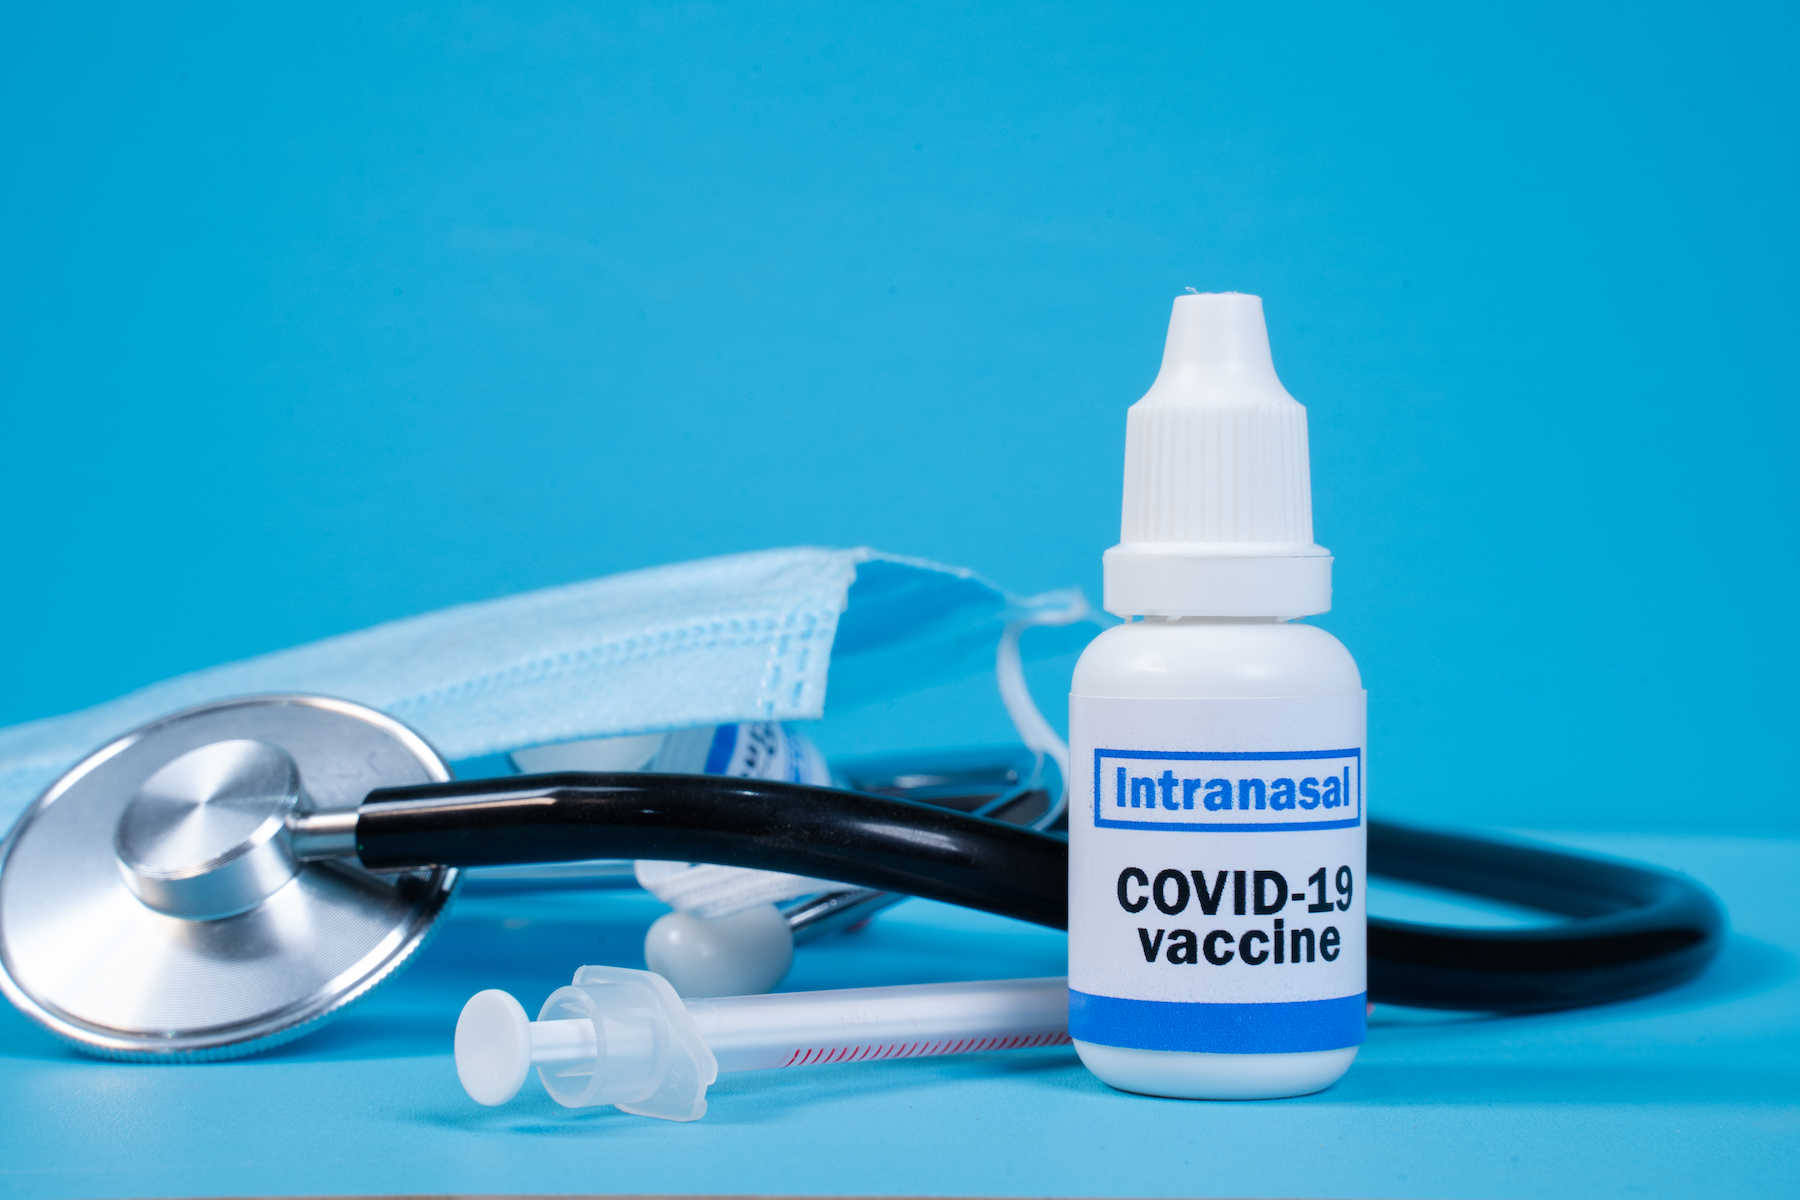 Concept showing of Coronavirus covid-19 new nasal or intranasal vaccination with medical equipments.